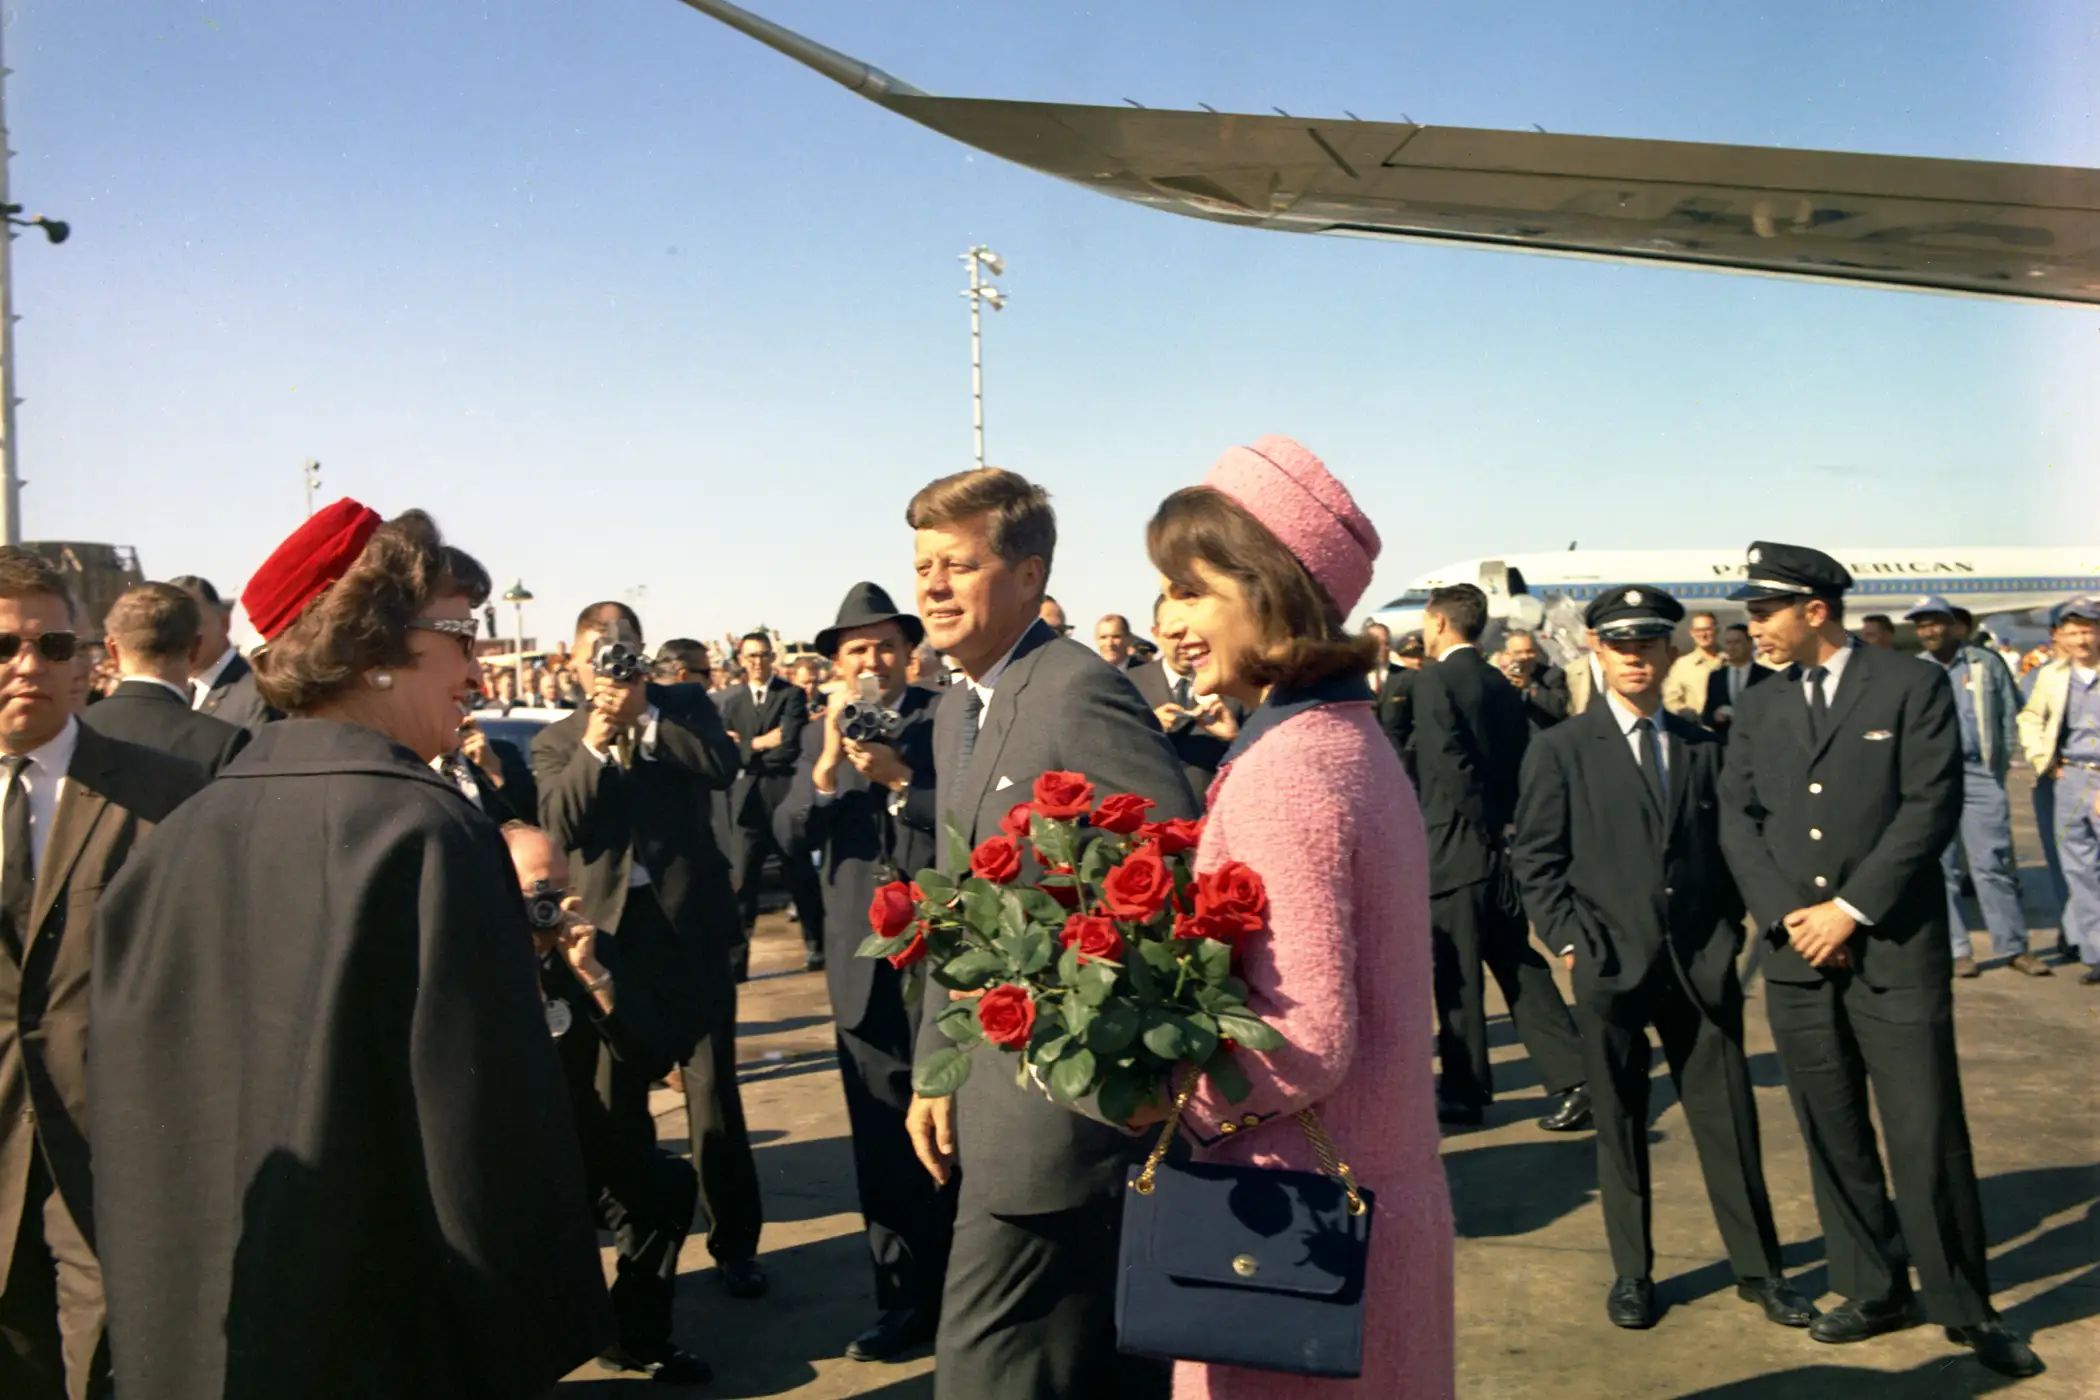 President and Mrs. Kennedy arrive at Love Field in Dallas, TX, November 22,1963.